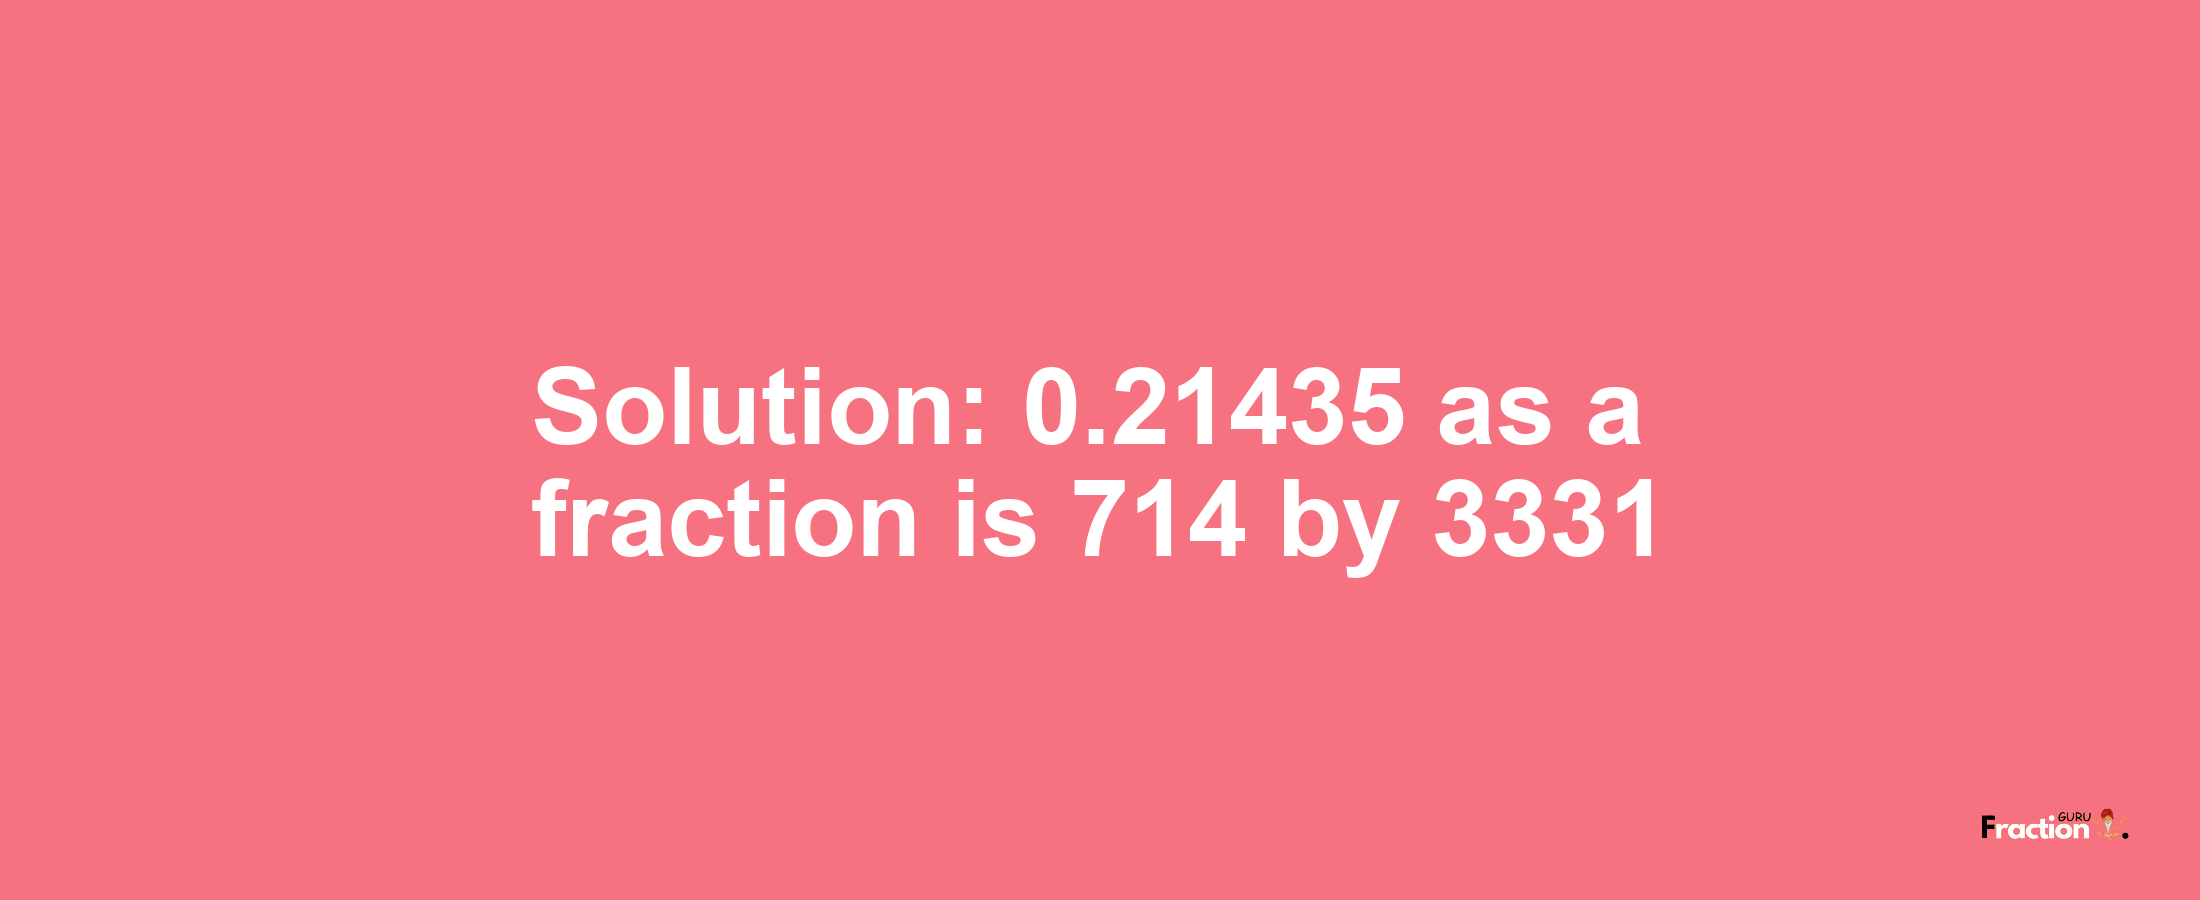 Solution:0.21435 as a fraction is 714/3331